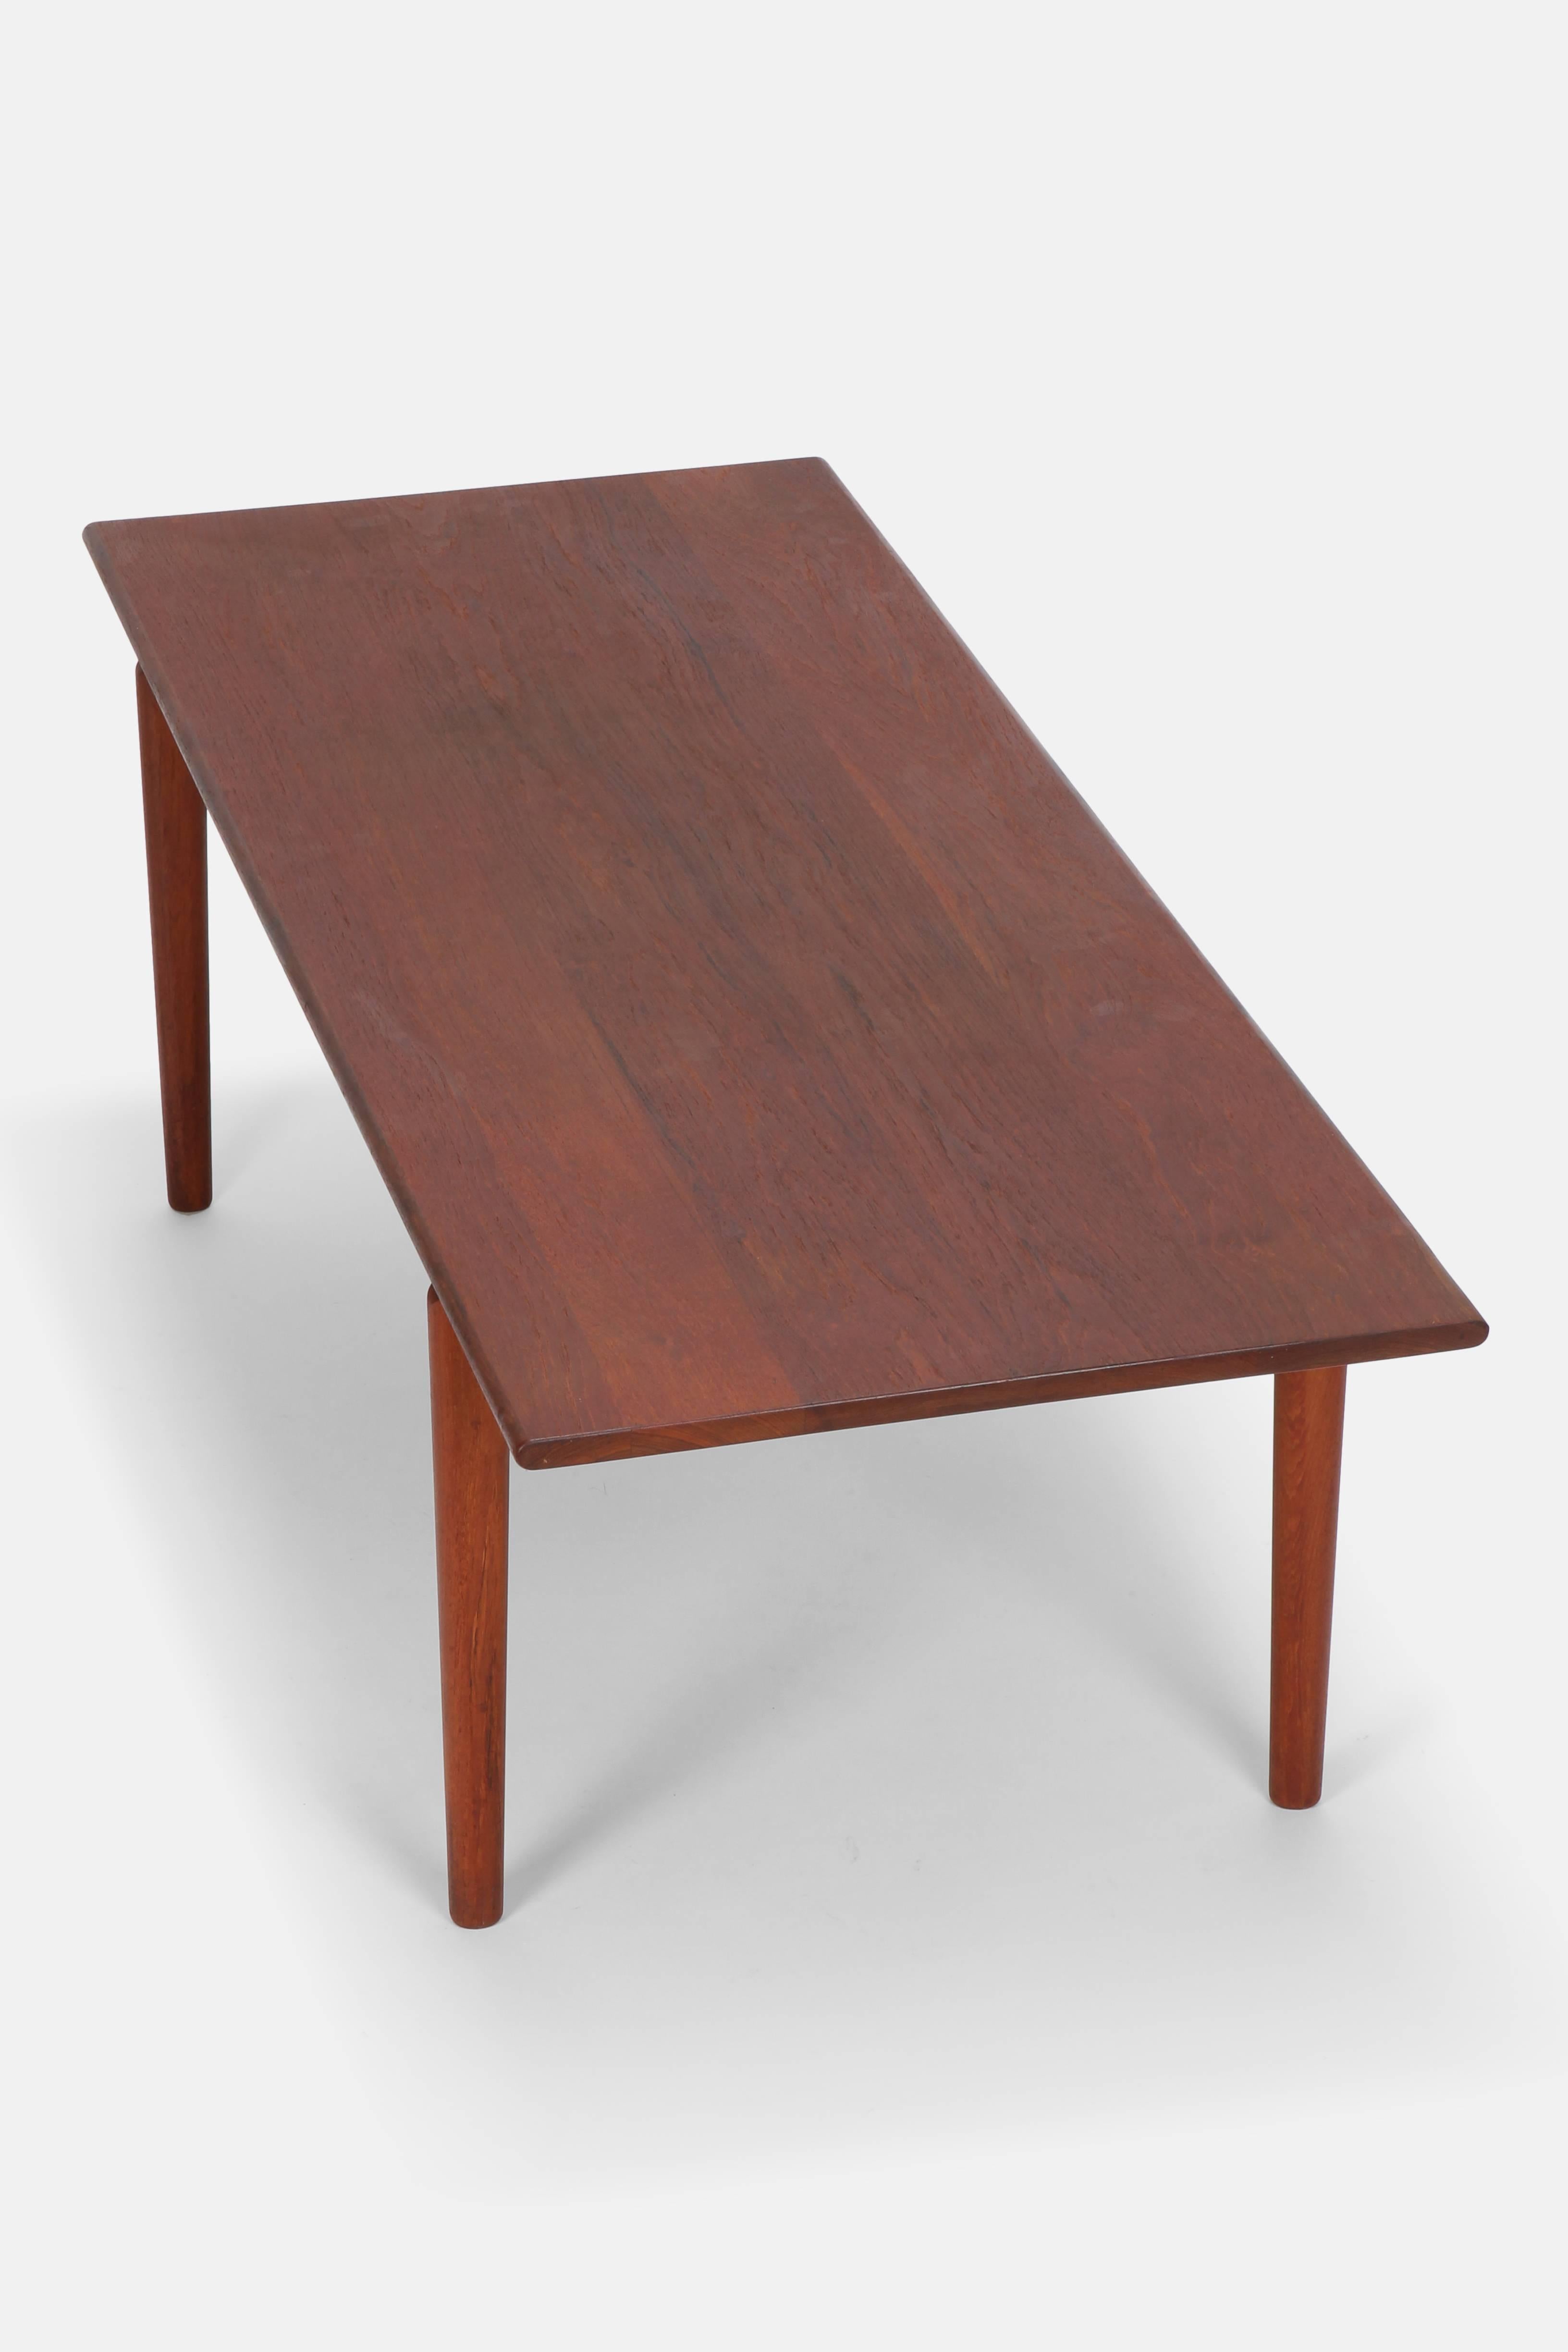 Hans Wegner Coffee Table Model AT-15 Andreas Tuck, 1960s In Good Condition For Sale In Basel, CH